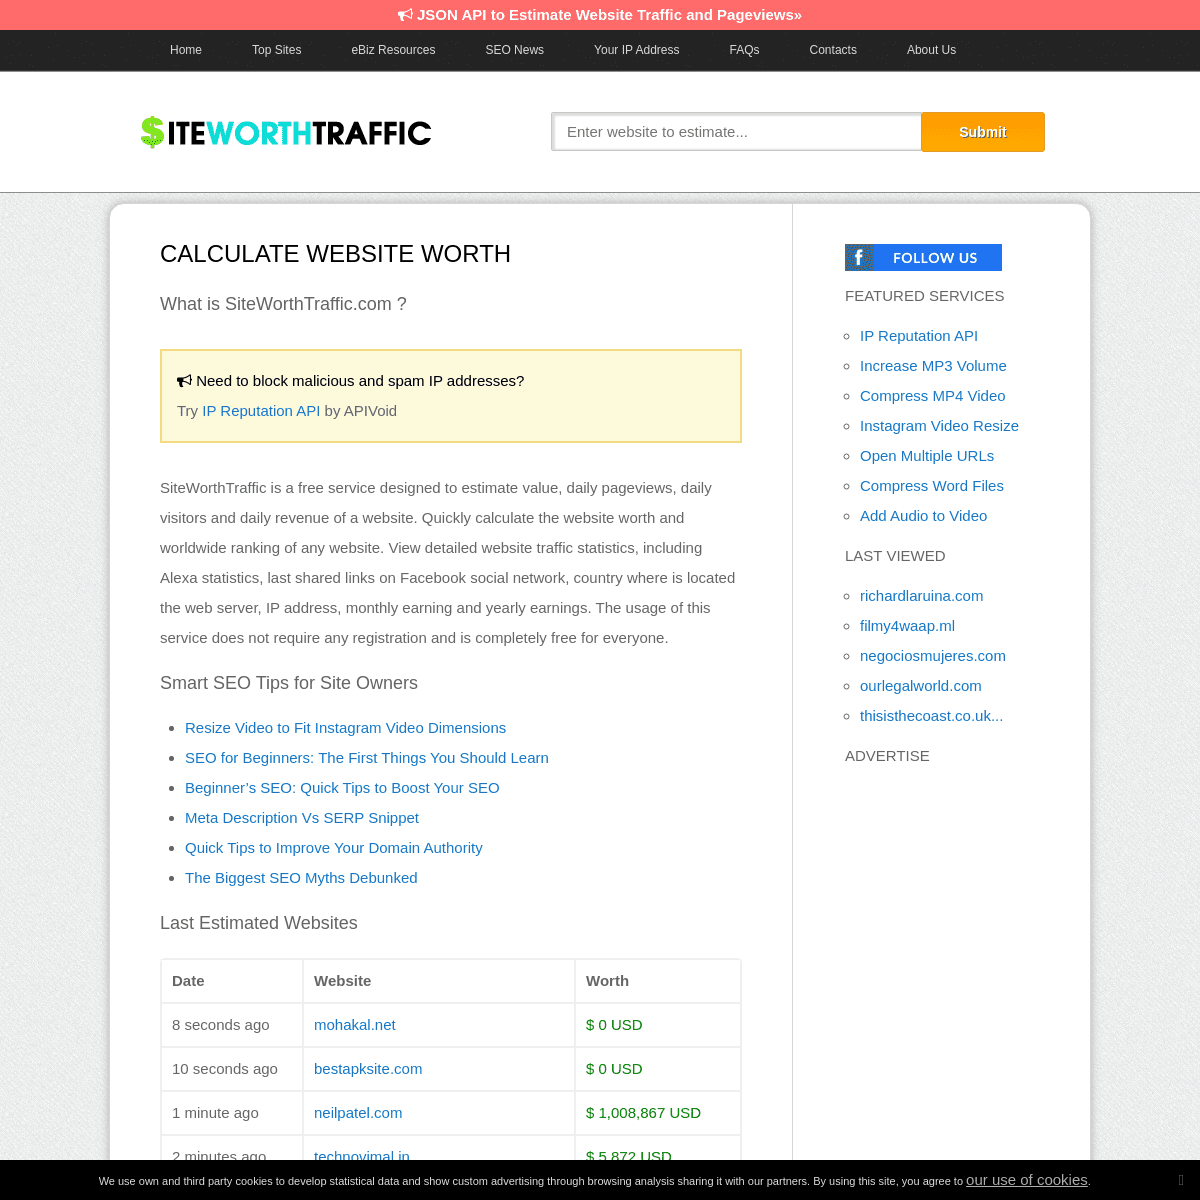 A complete backup of https://www.siteworthtraffic.com/